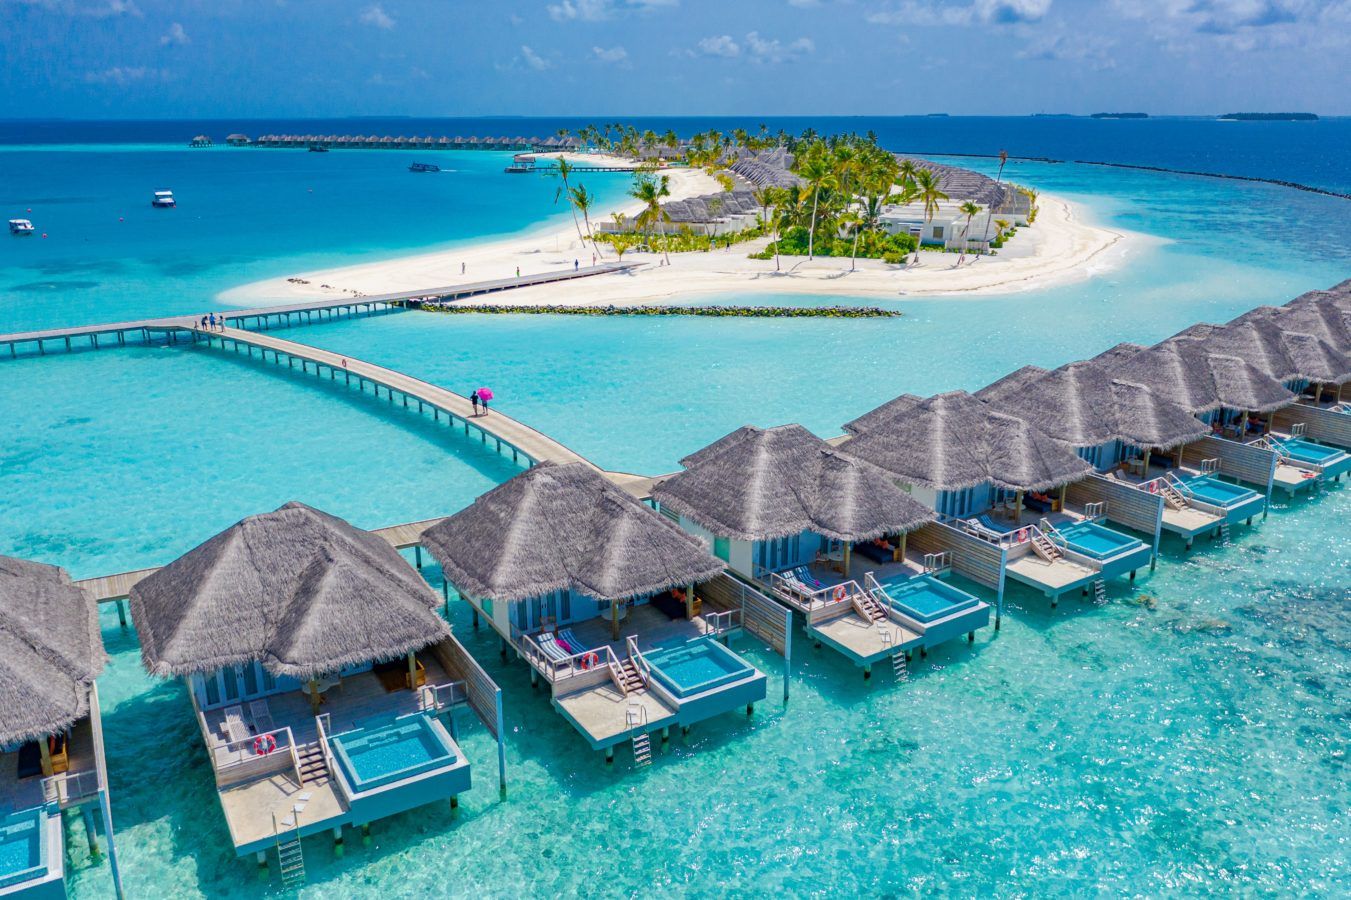 tour from india to maldives